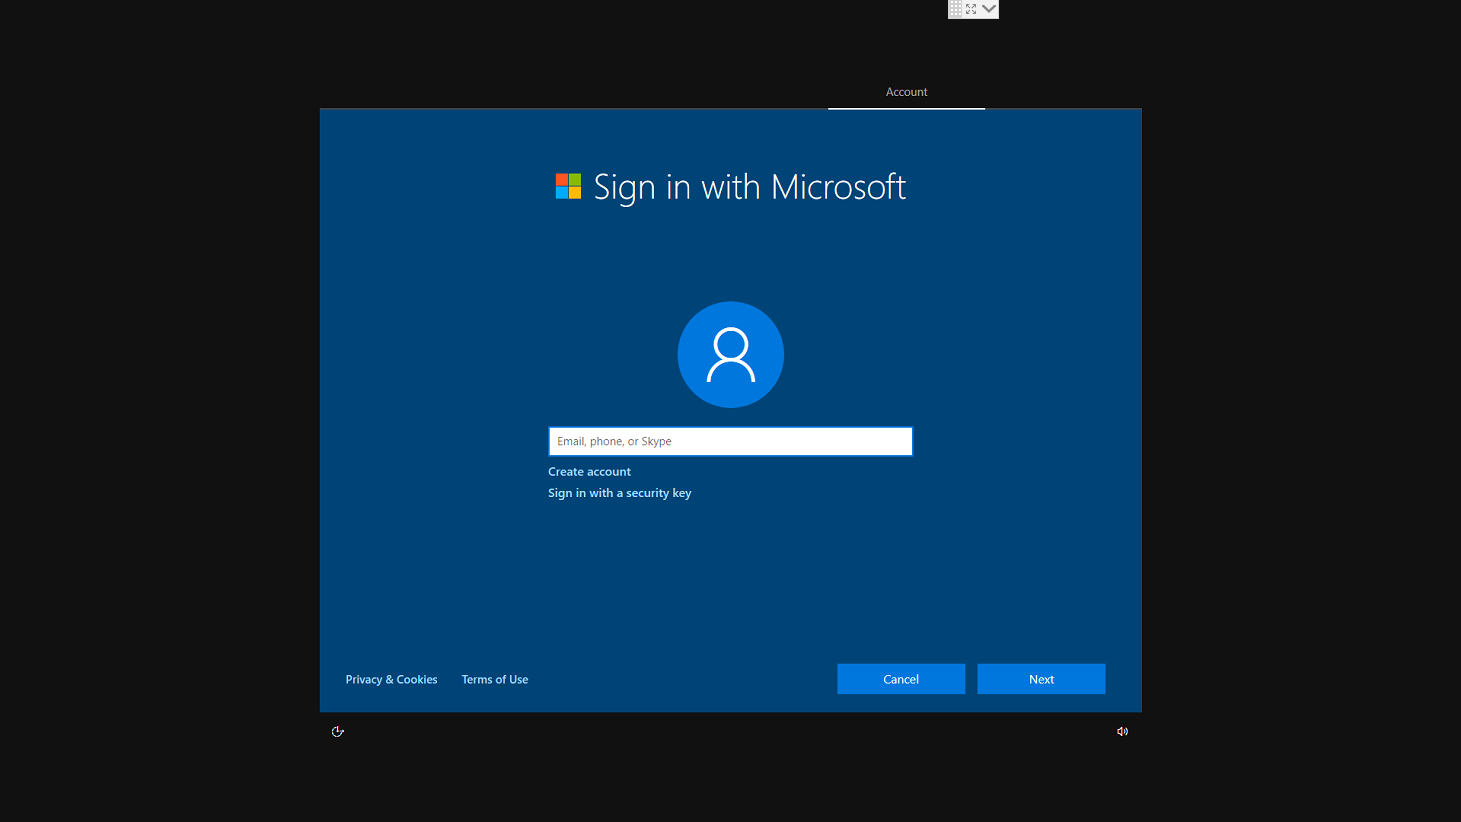 Windows 10 Updates Sign In With Microsoft